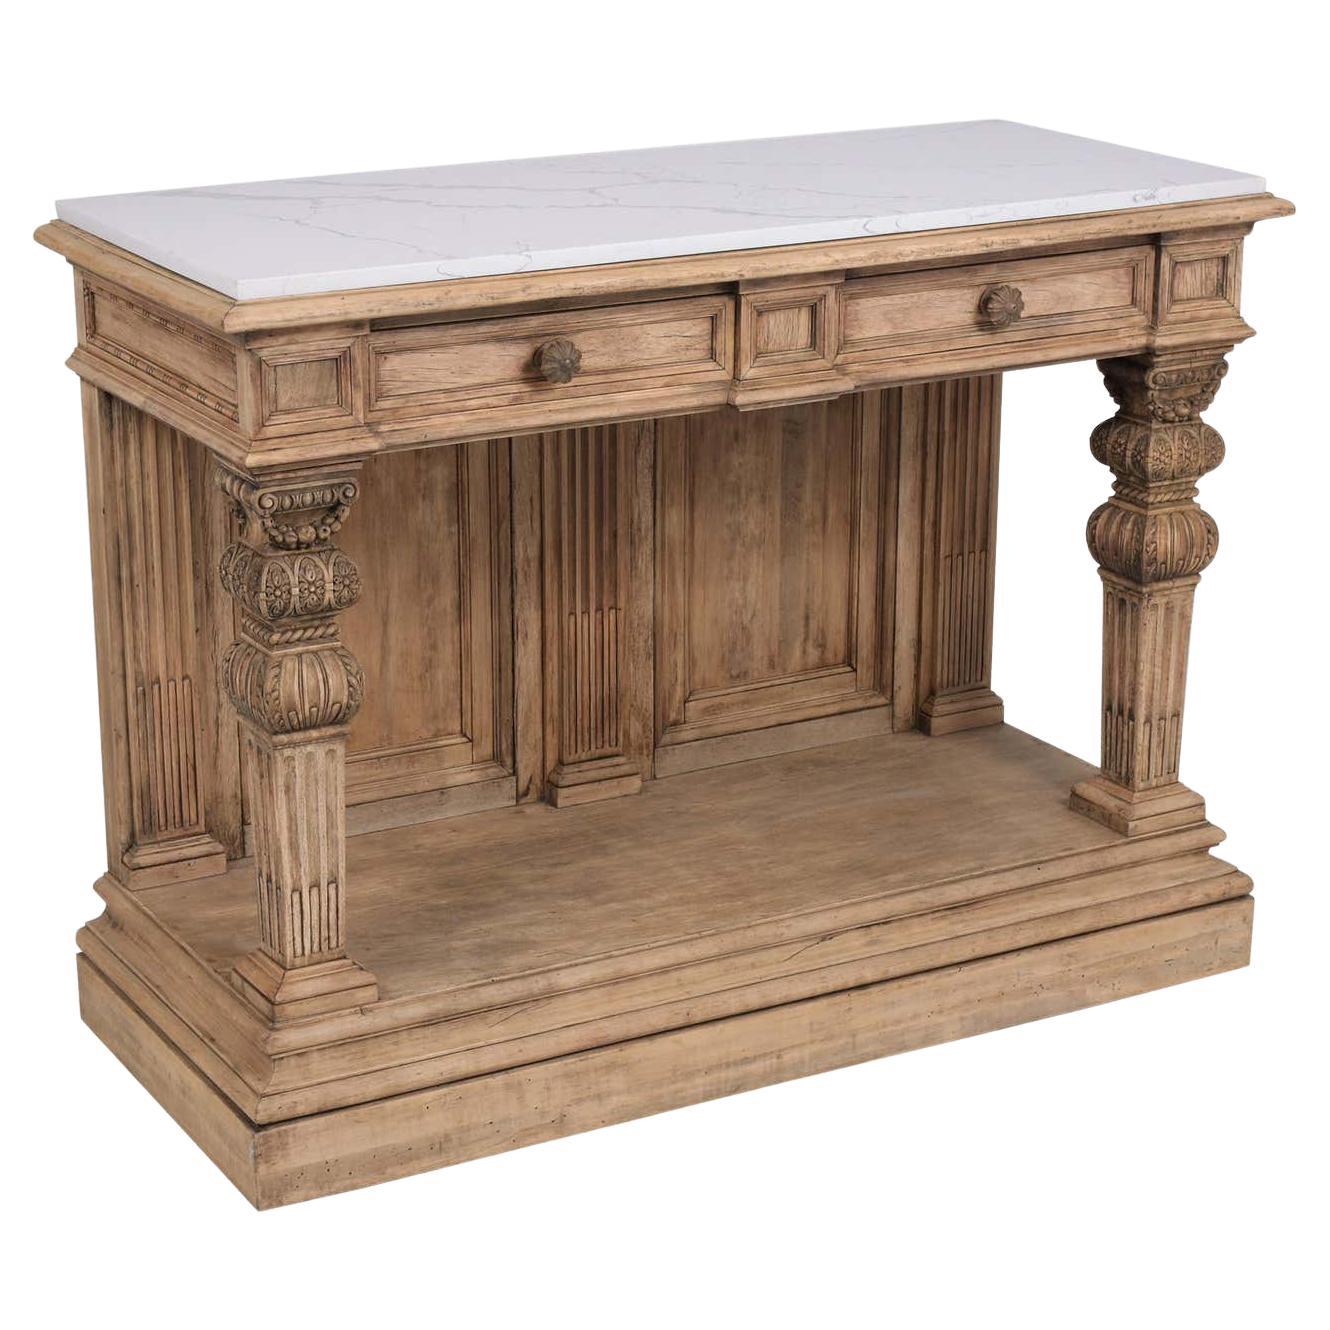 1880s Antique Baroque Carved Console with Marble Top: Historical Elegance Revive